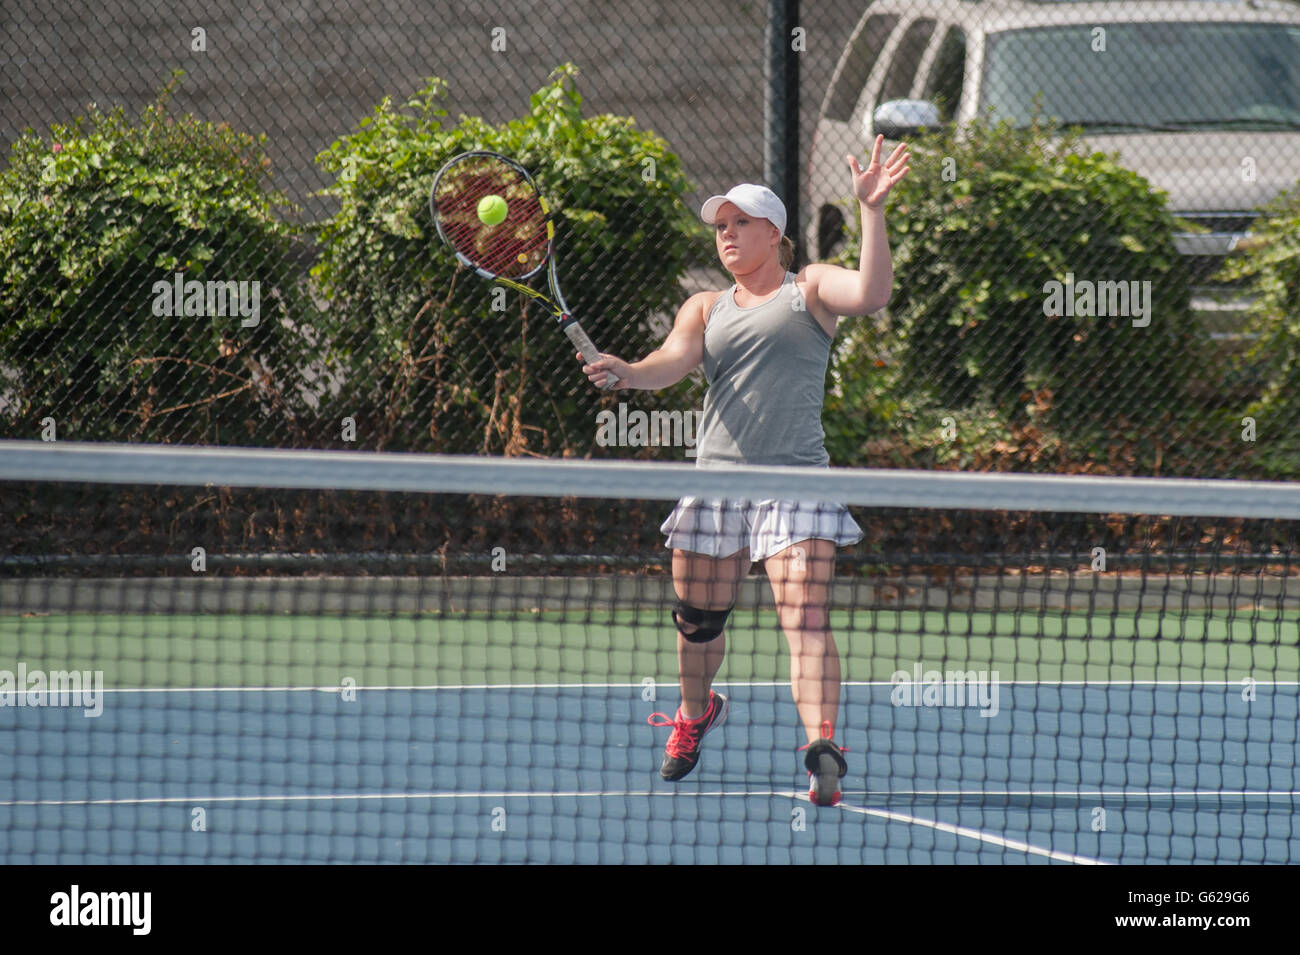 Female tennis player putting the ball on the sweet spot Stock Photo